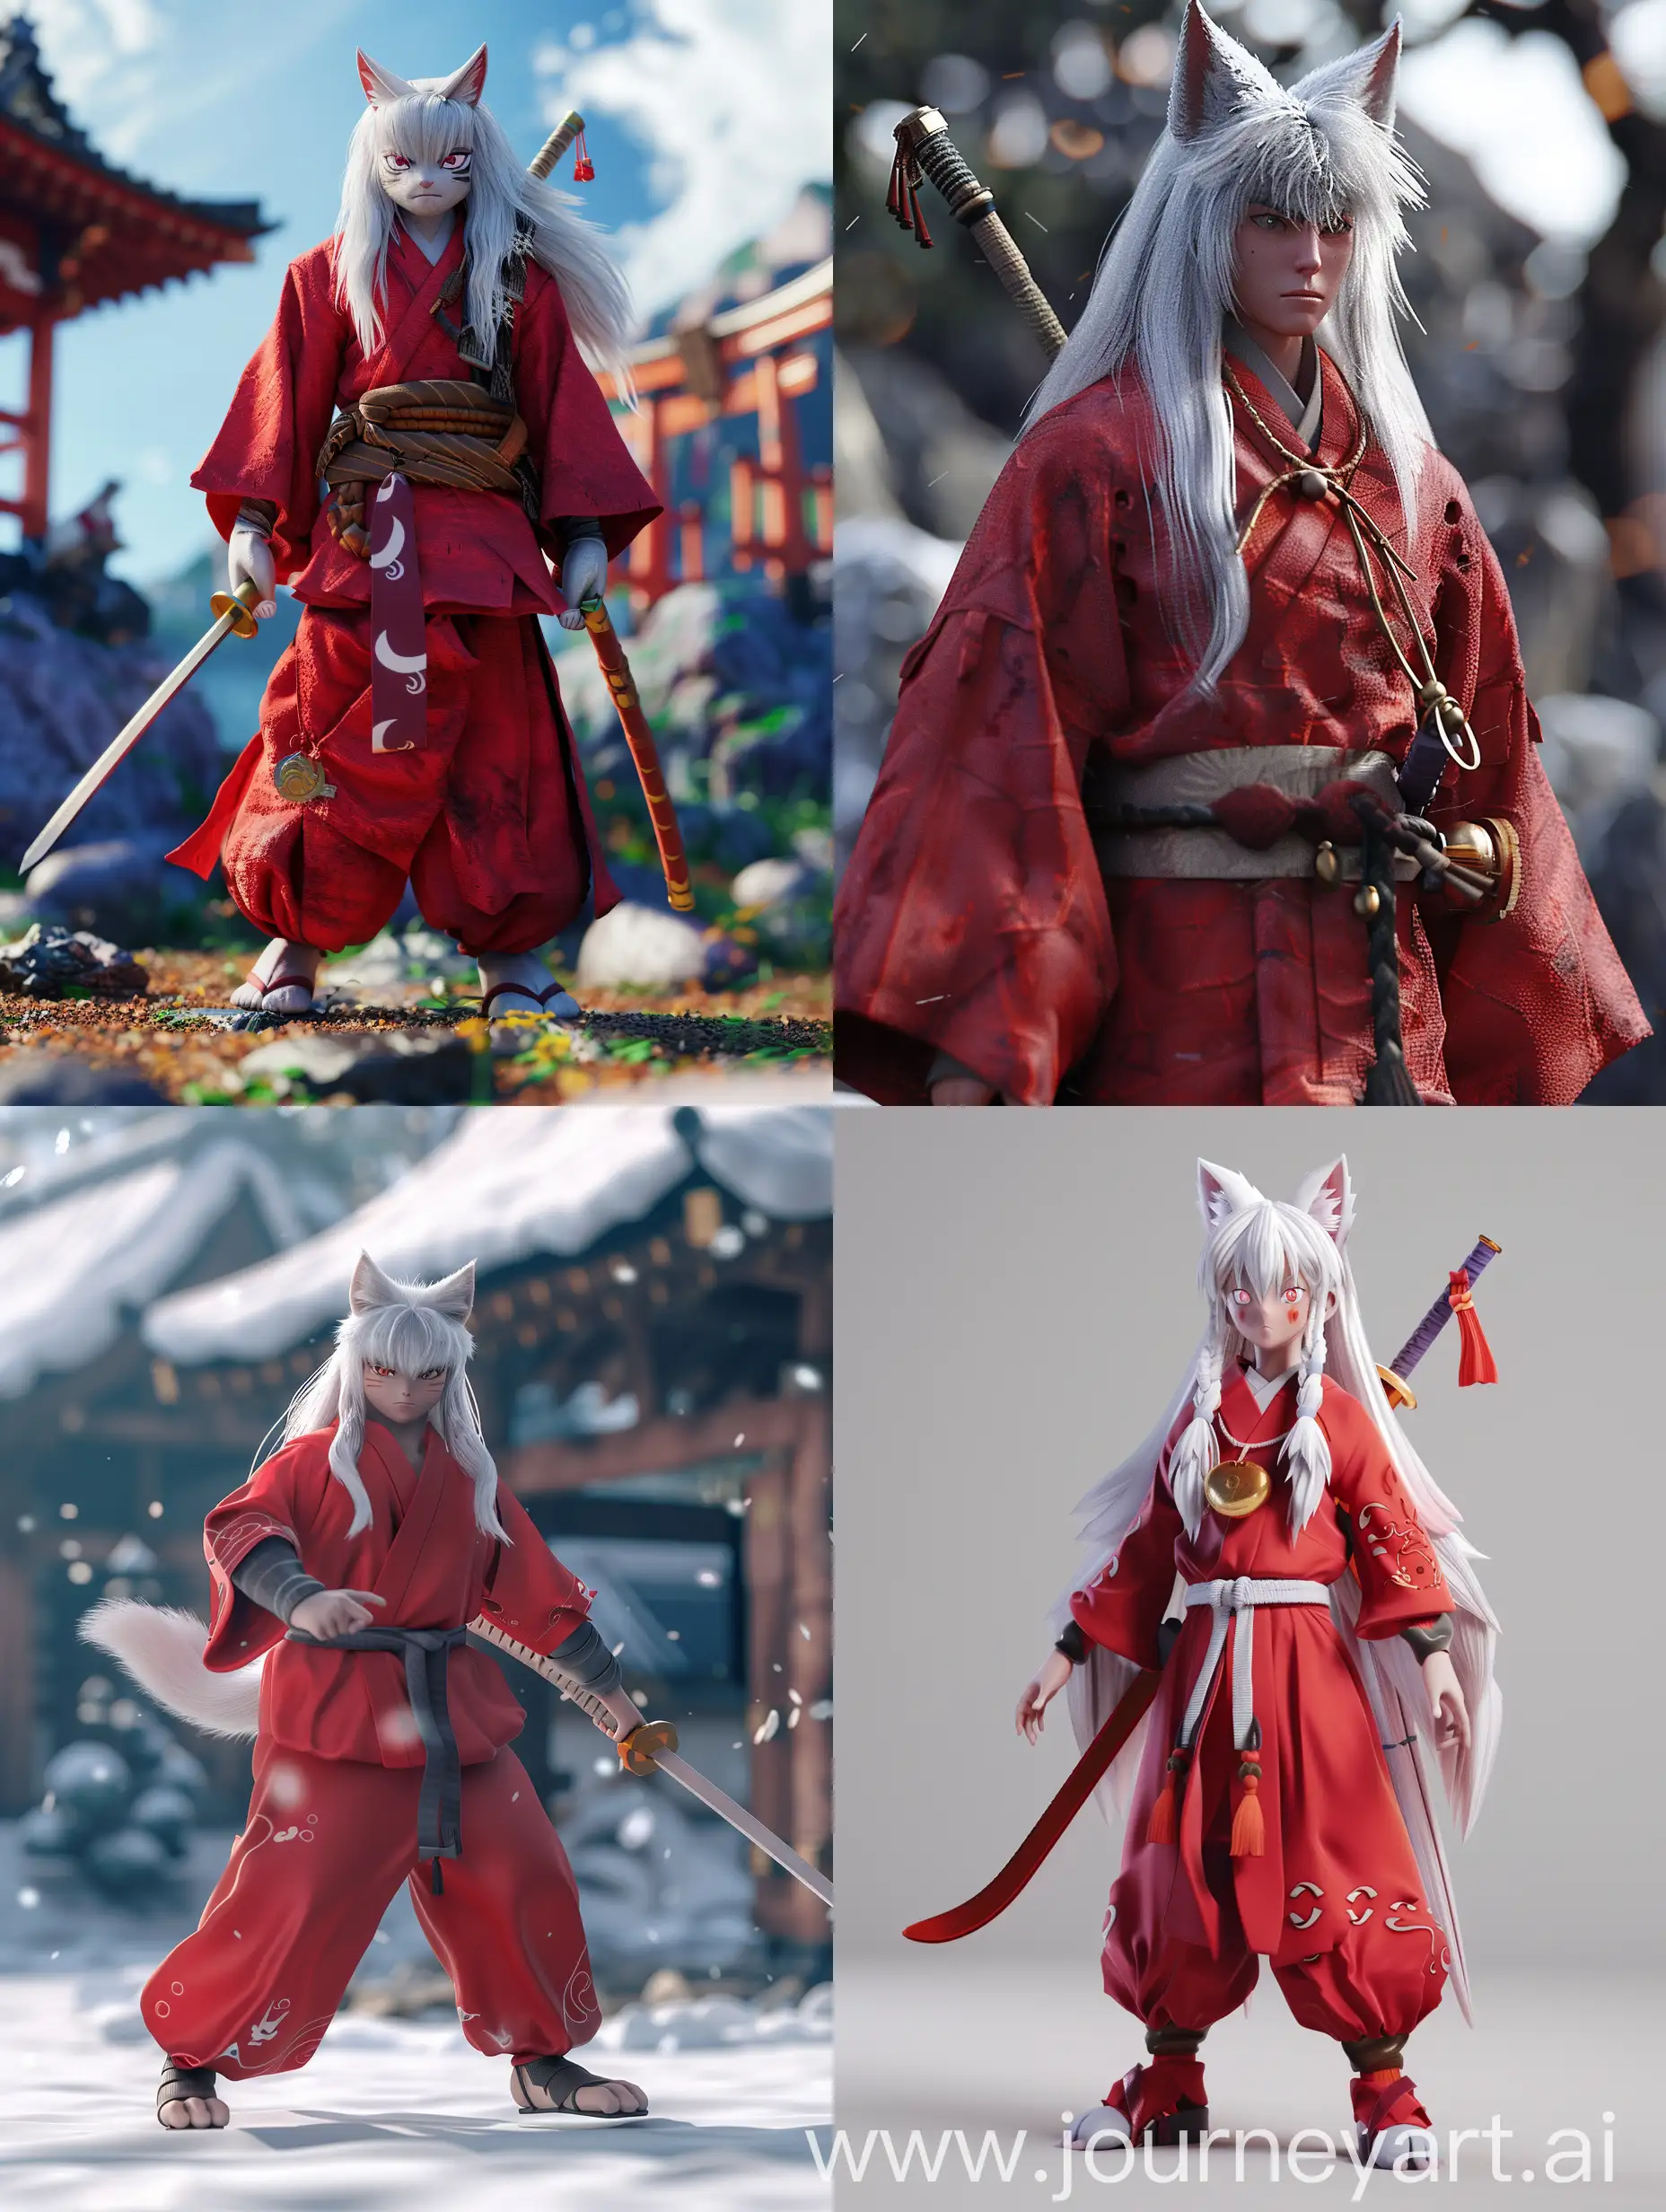 3D character, cinematic movie effect, long shot, intricate details, 32k, higt quality, InuYasha character.